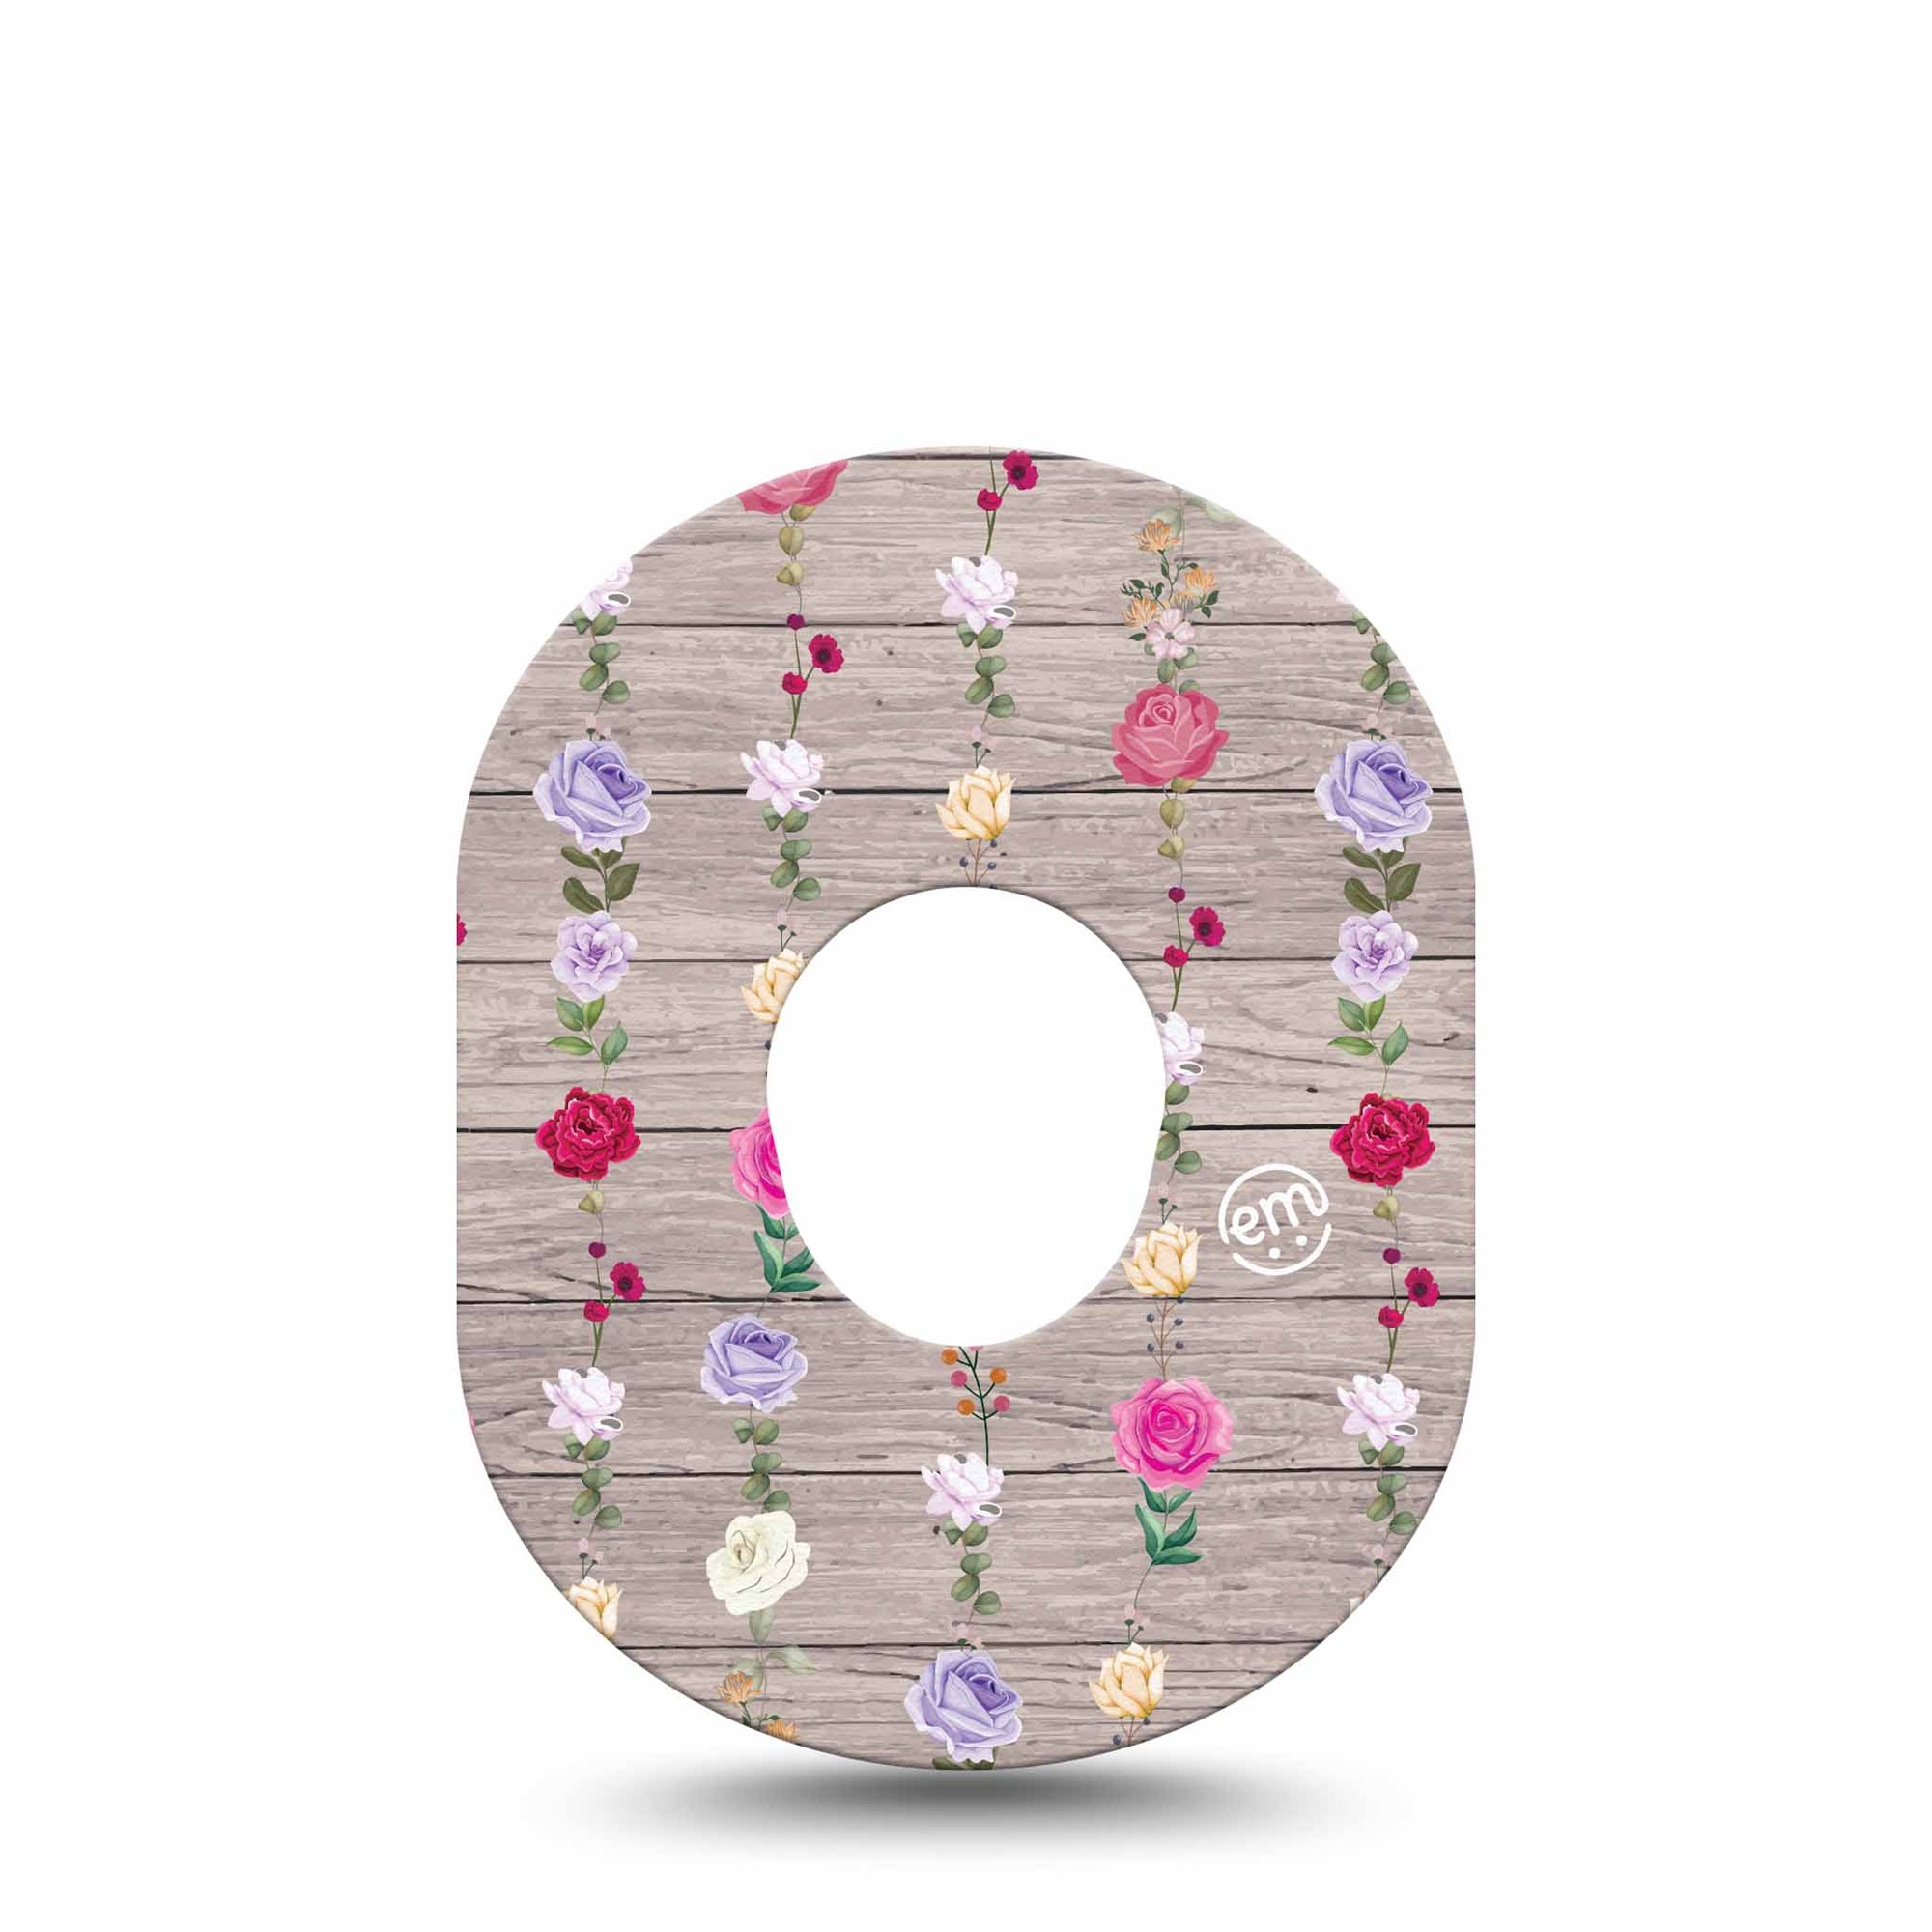 ExpressionMed Hanging Flowers Dexcom G7 Tape, Single, Beautiful Flowers Themed, CGM Patch Design